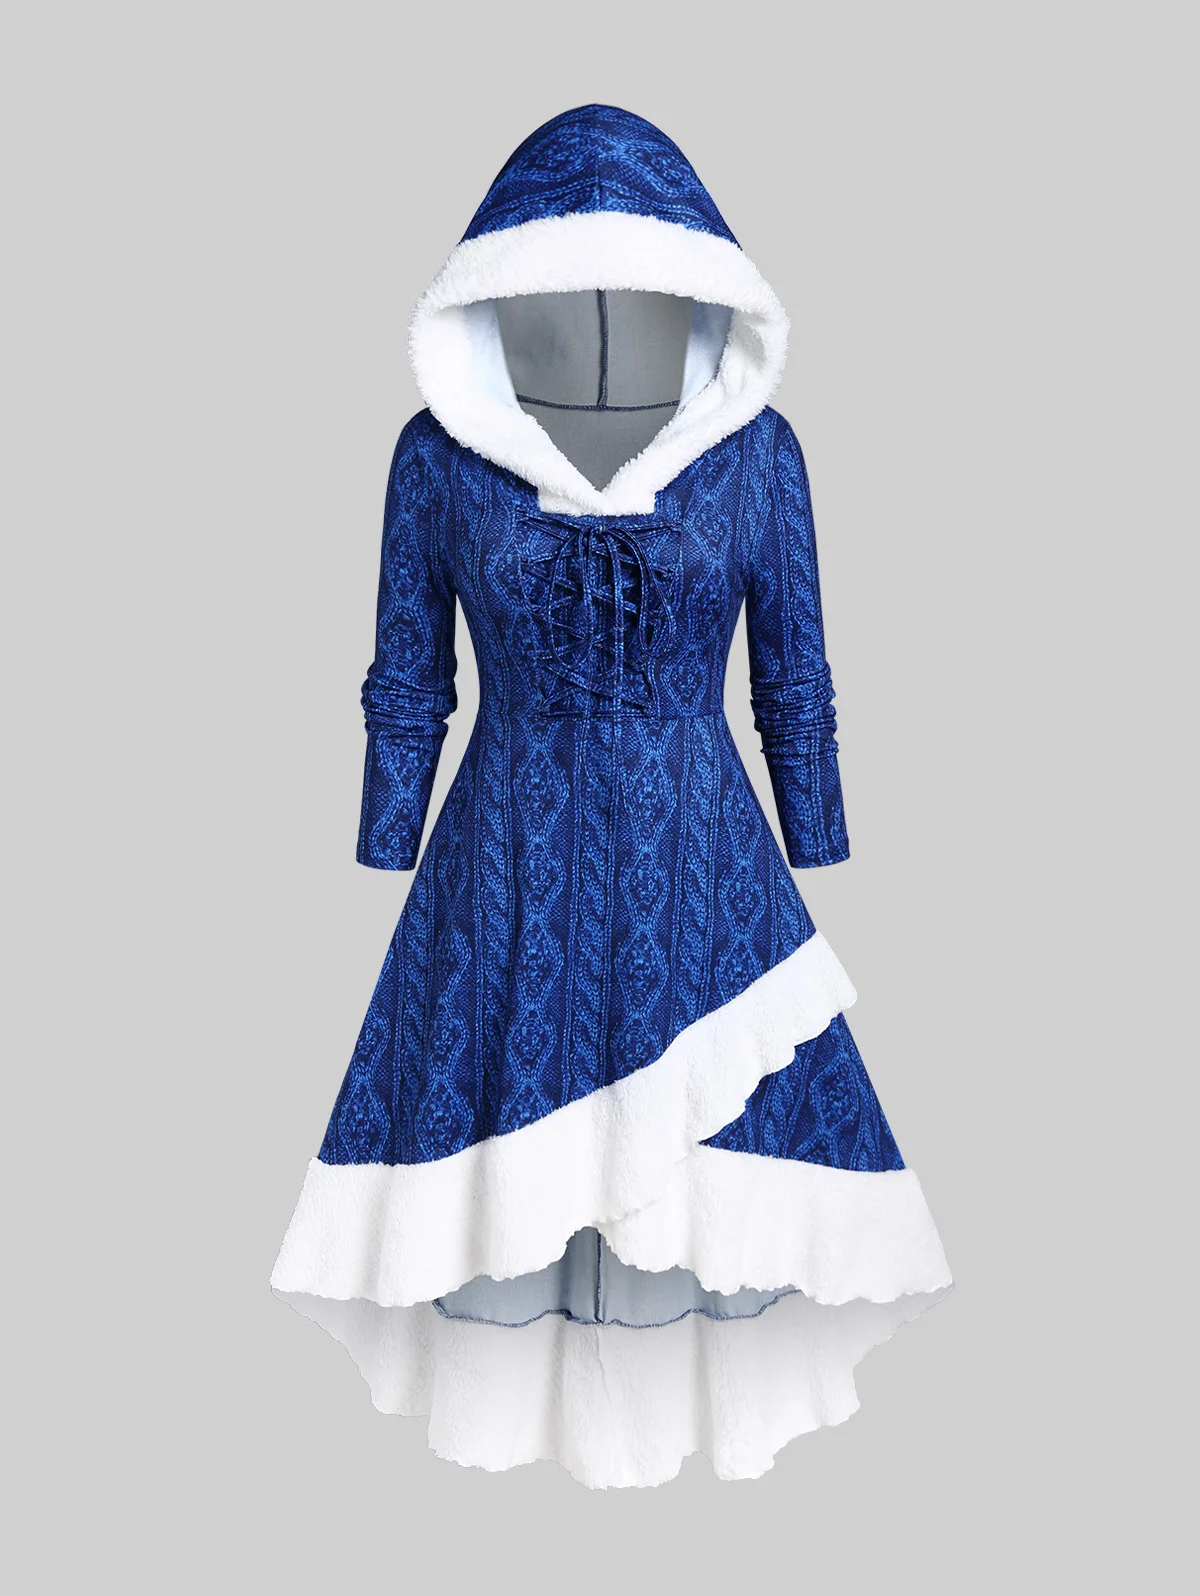 

ROSEGAL 3D Cable Knit Print Fluffy Trim Dresses Blue Vestidos 5XL Winter Hooded Lace-up Long Sleeve Asymmetrical Dress For Women